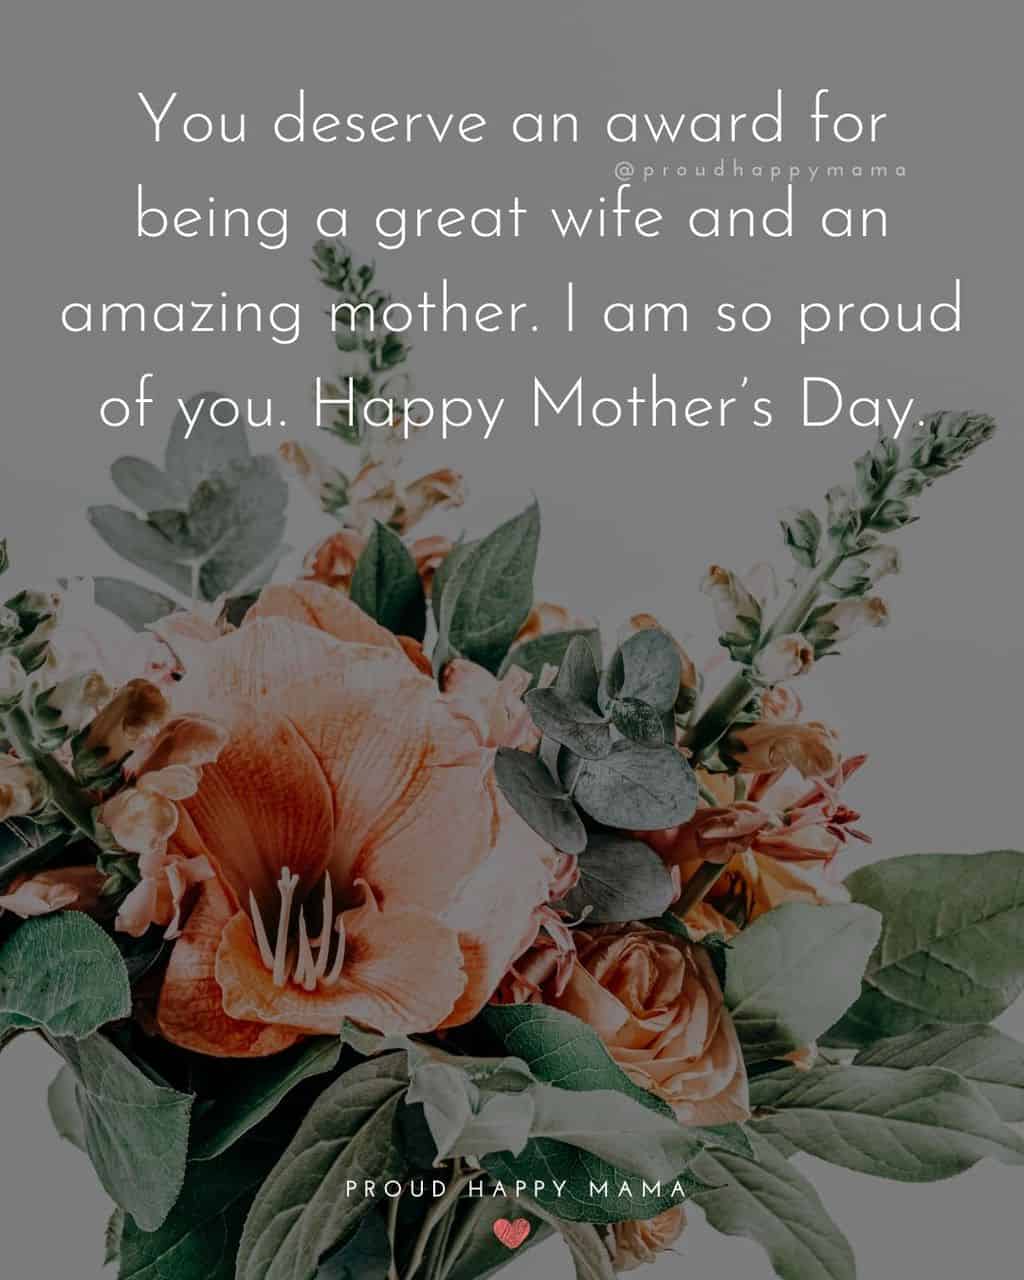 Happy Mothers Day Quotes For Wife - You deserve an award for being a great wife and an amazing mother. I am so proud of you.